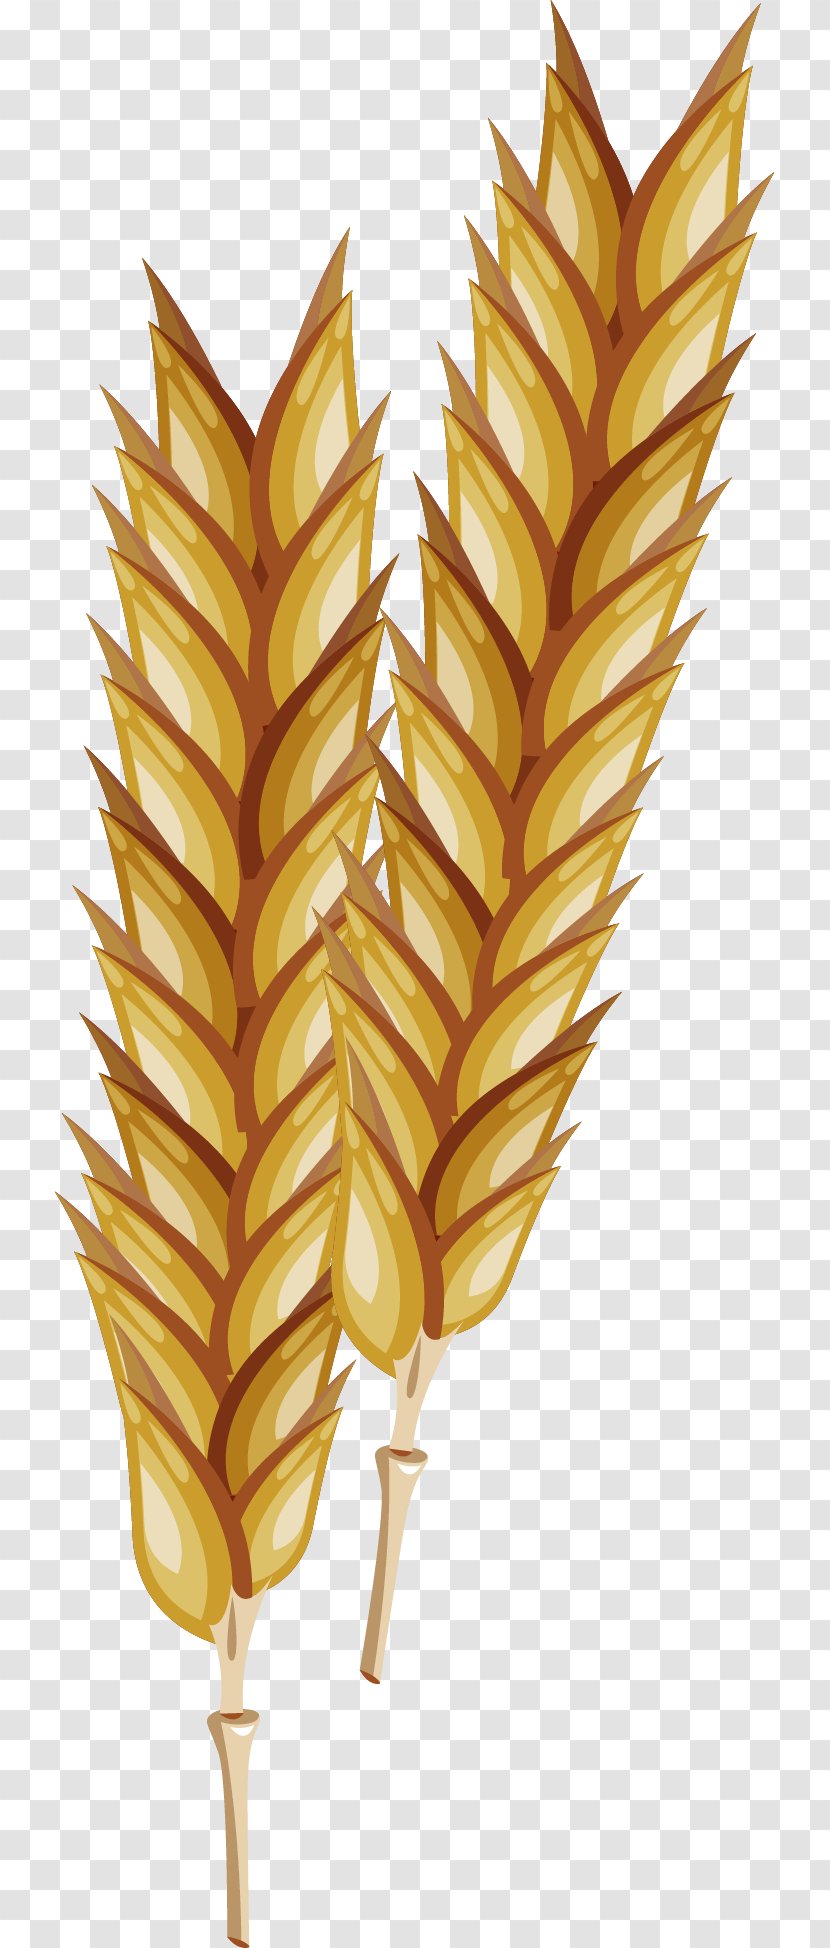 Euclidean Vector Adobe Illustrator - Grass Family - Realistic Wheat Transparent PNG